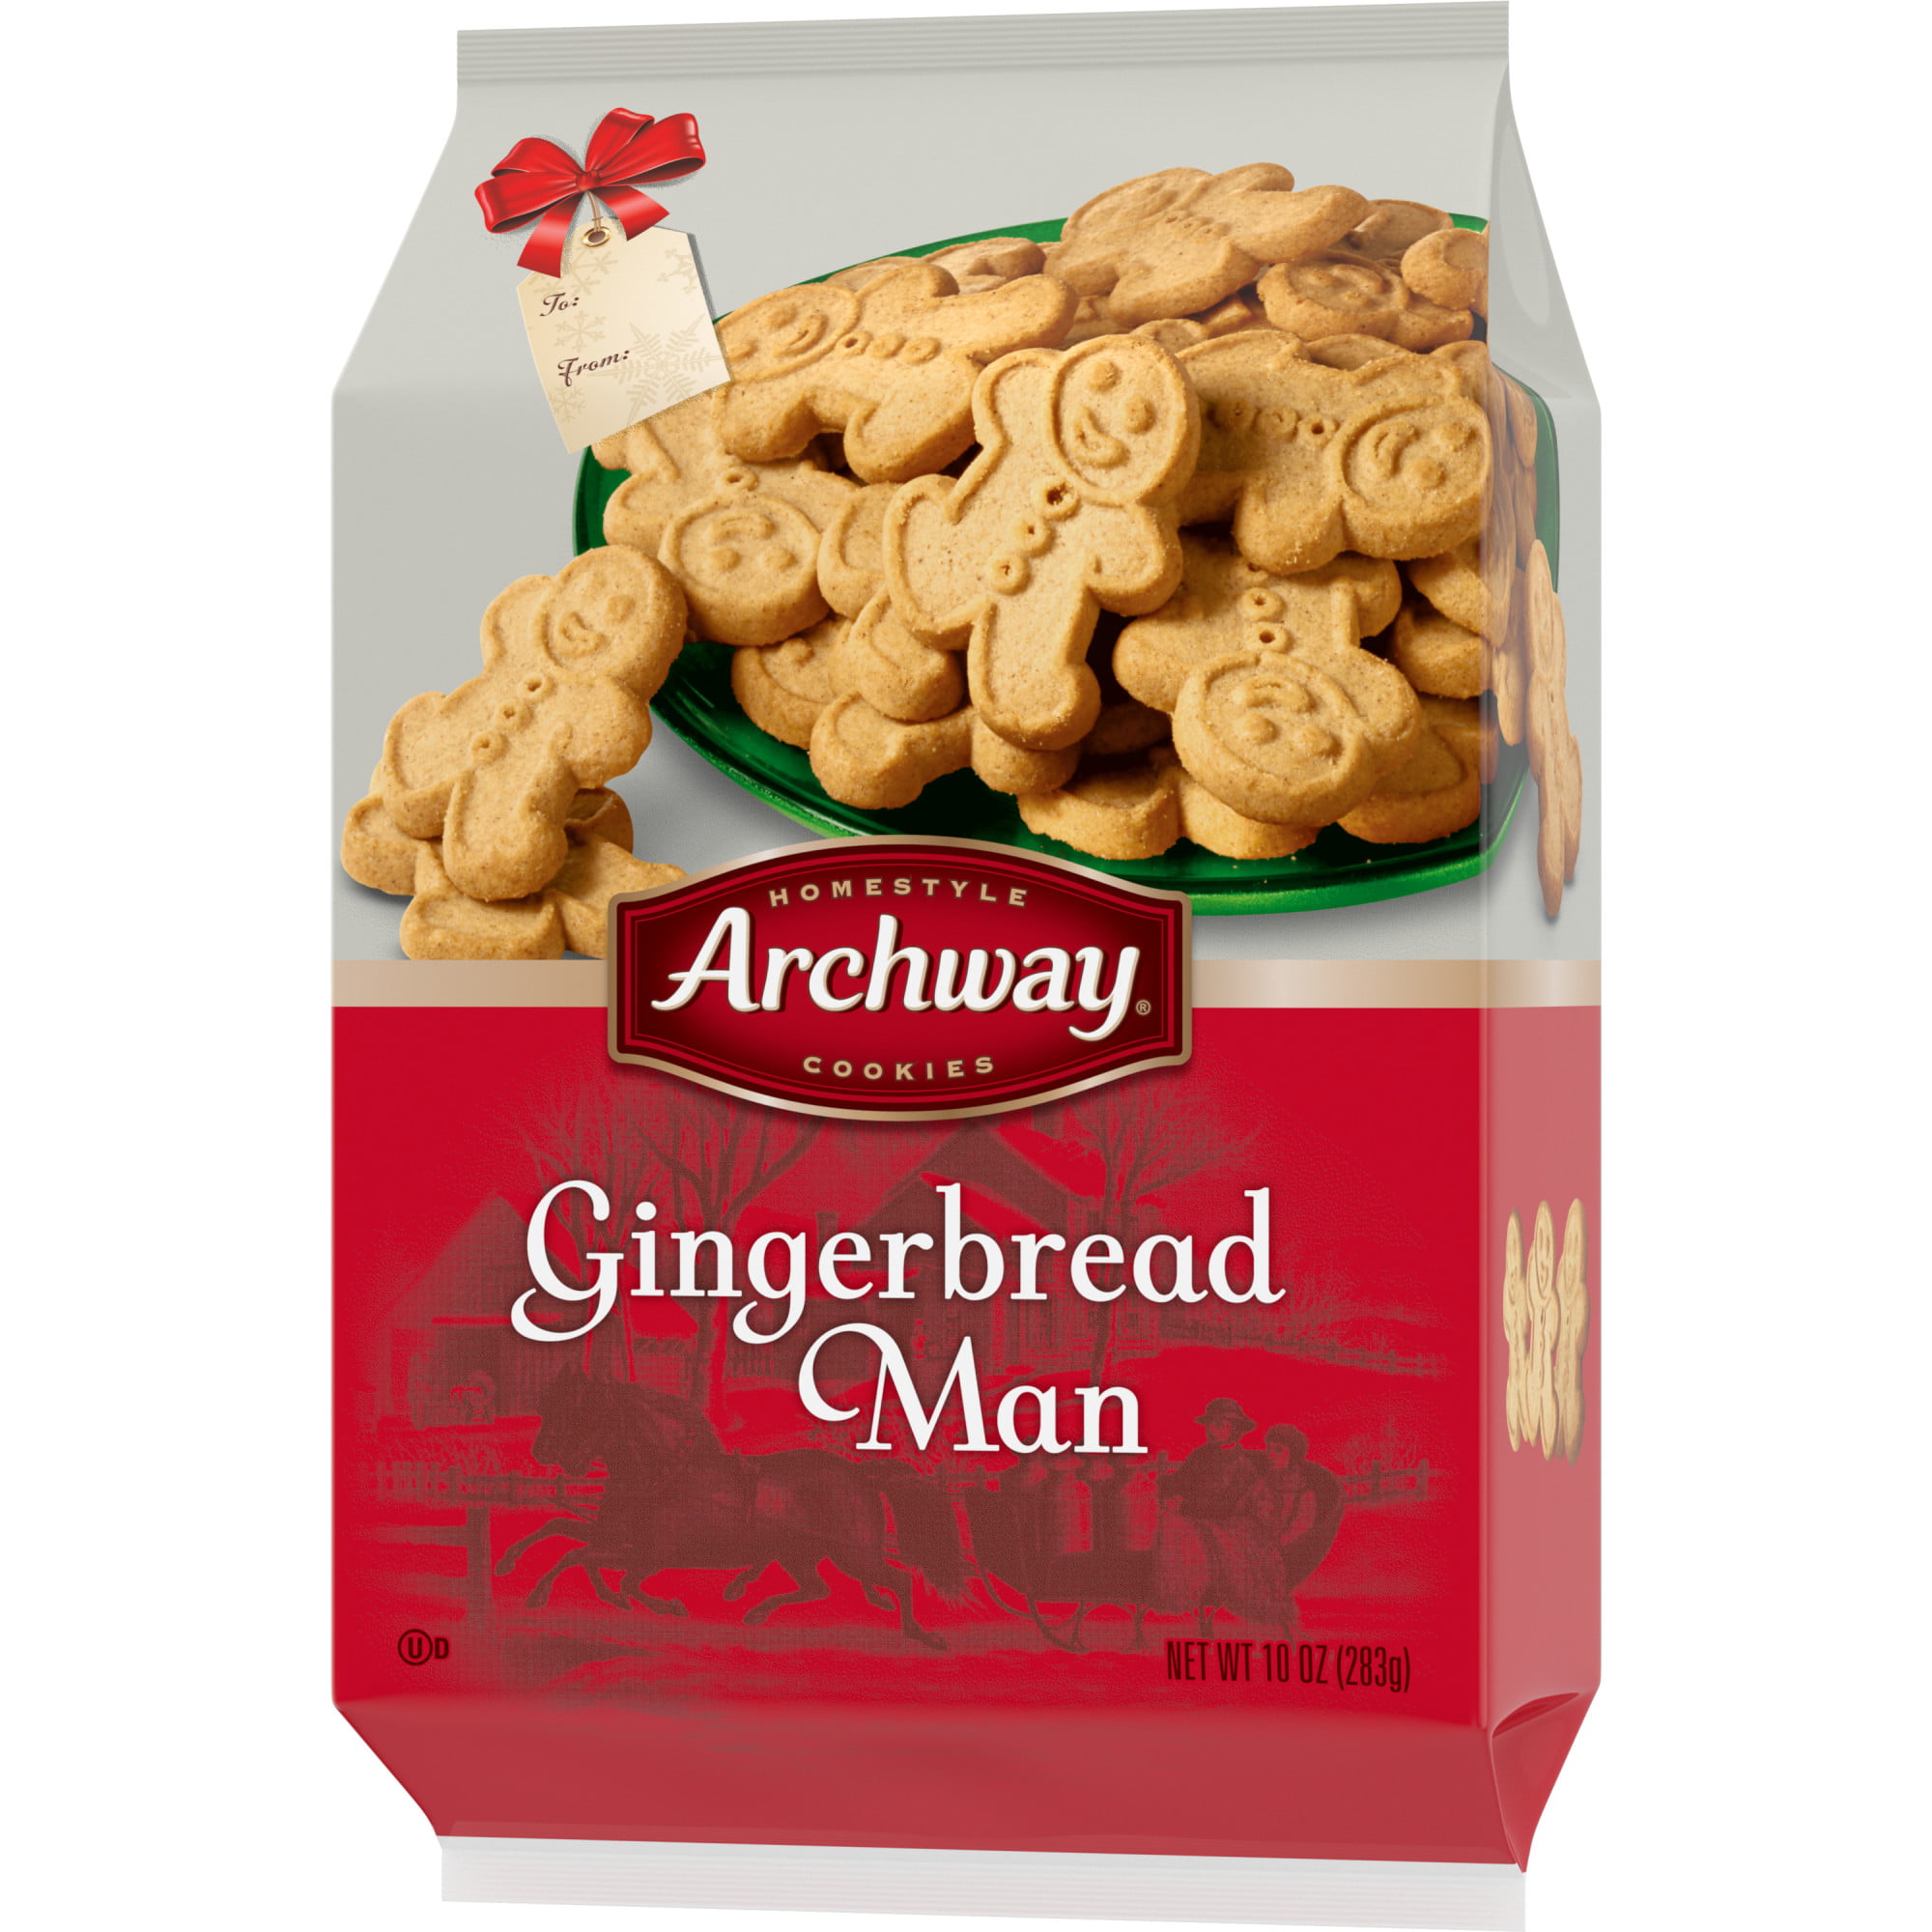 Archway Iced Gingerbread Man Cookies - Archway Iced ...